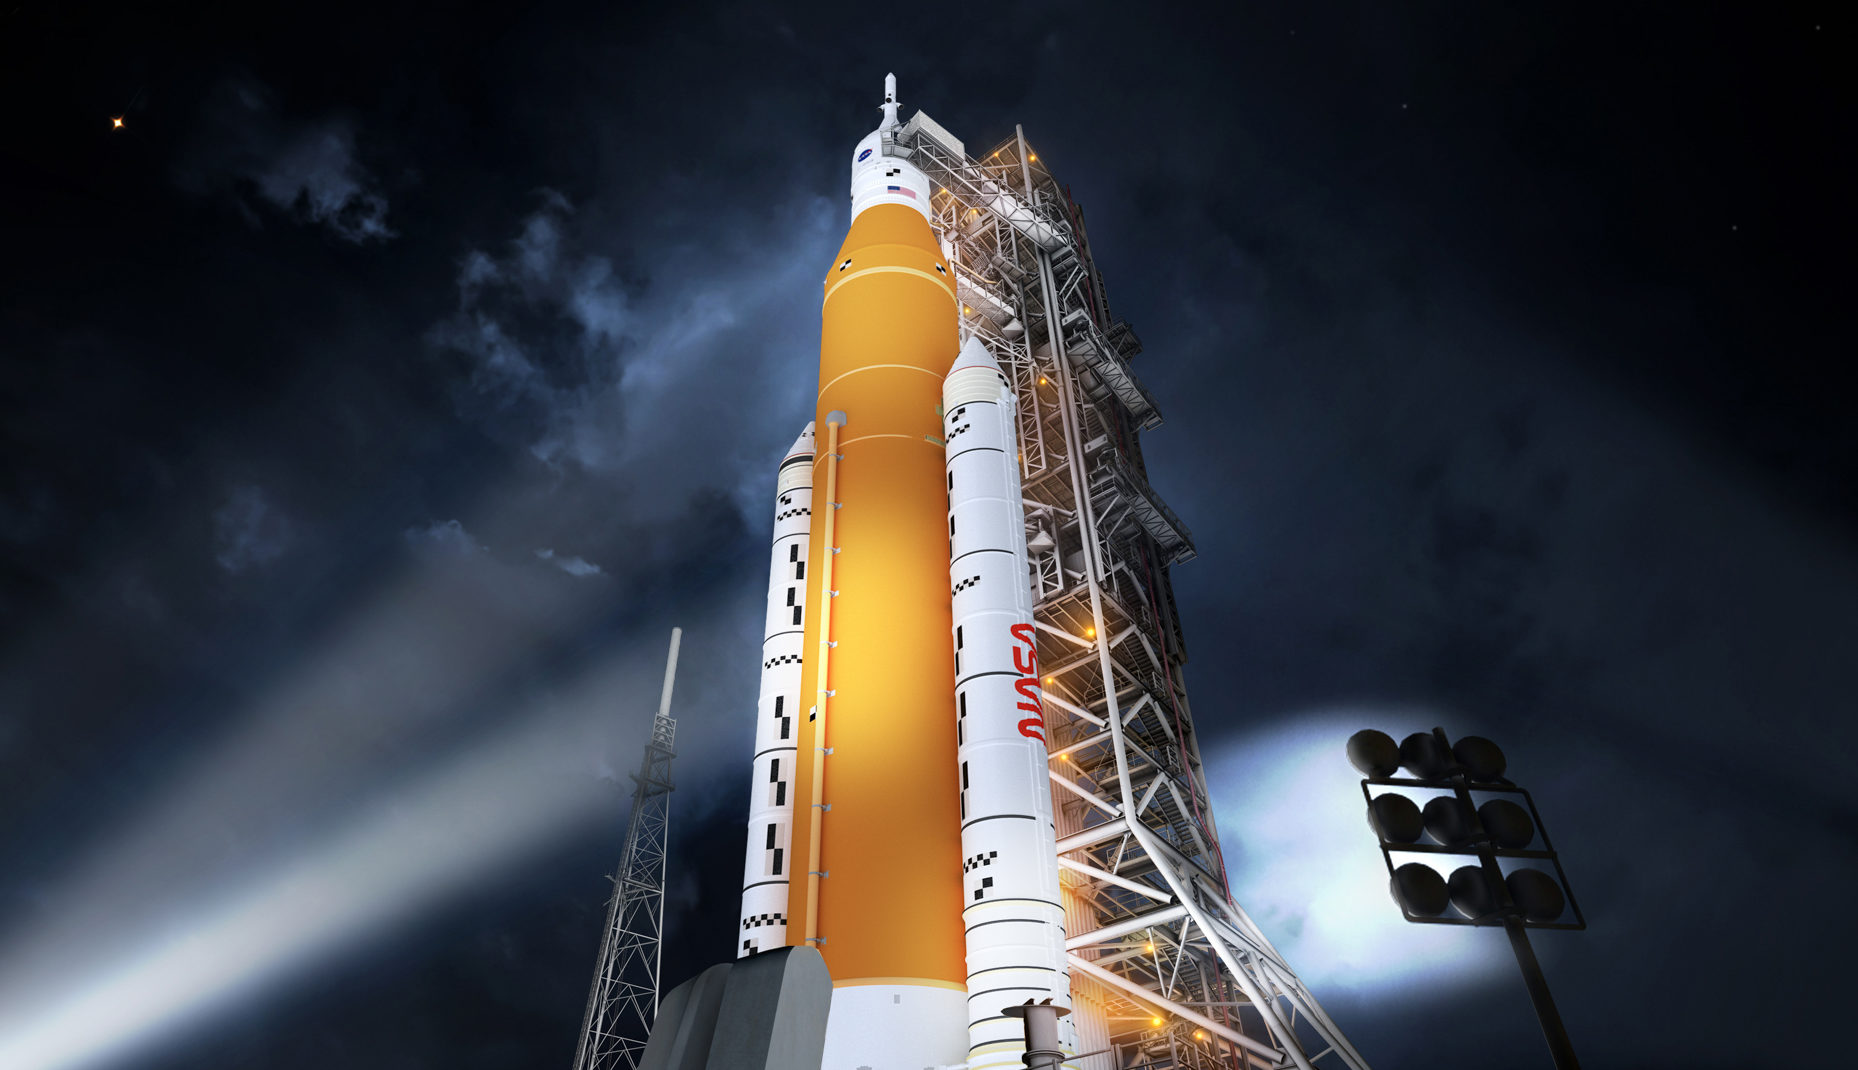 How To Watch NASA's Artemis I Rocket Launch Live In VR - VRScout